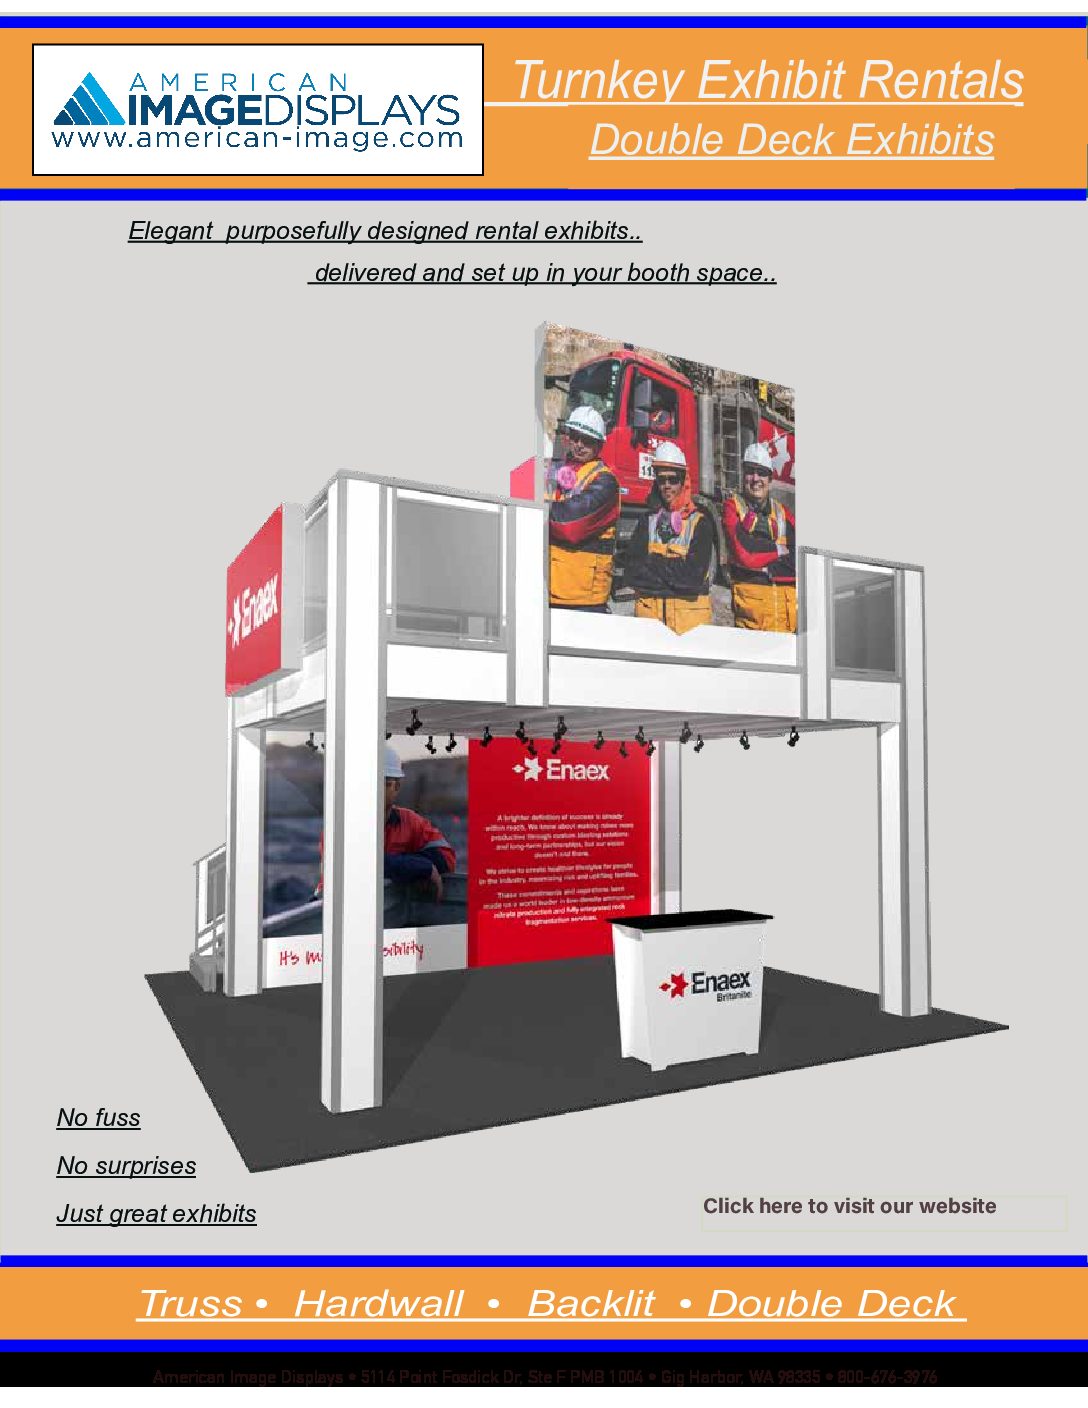 Turnkey Rental of Island Double-Deck Trade Show Booths